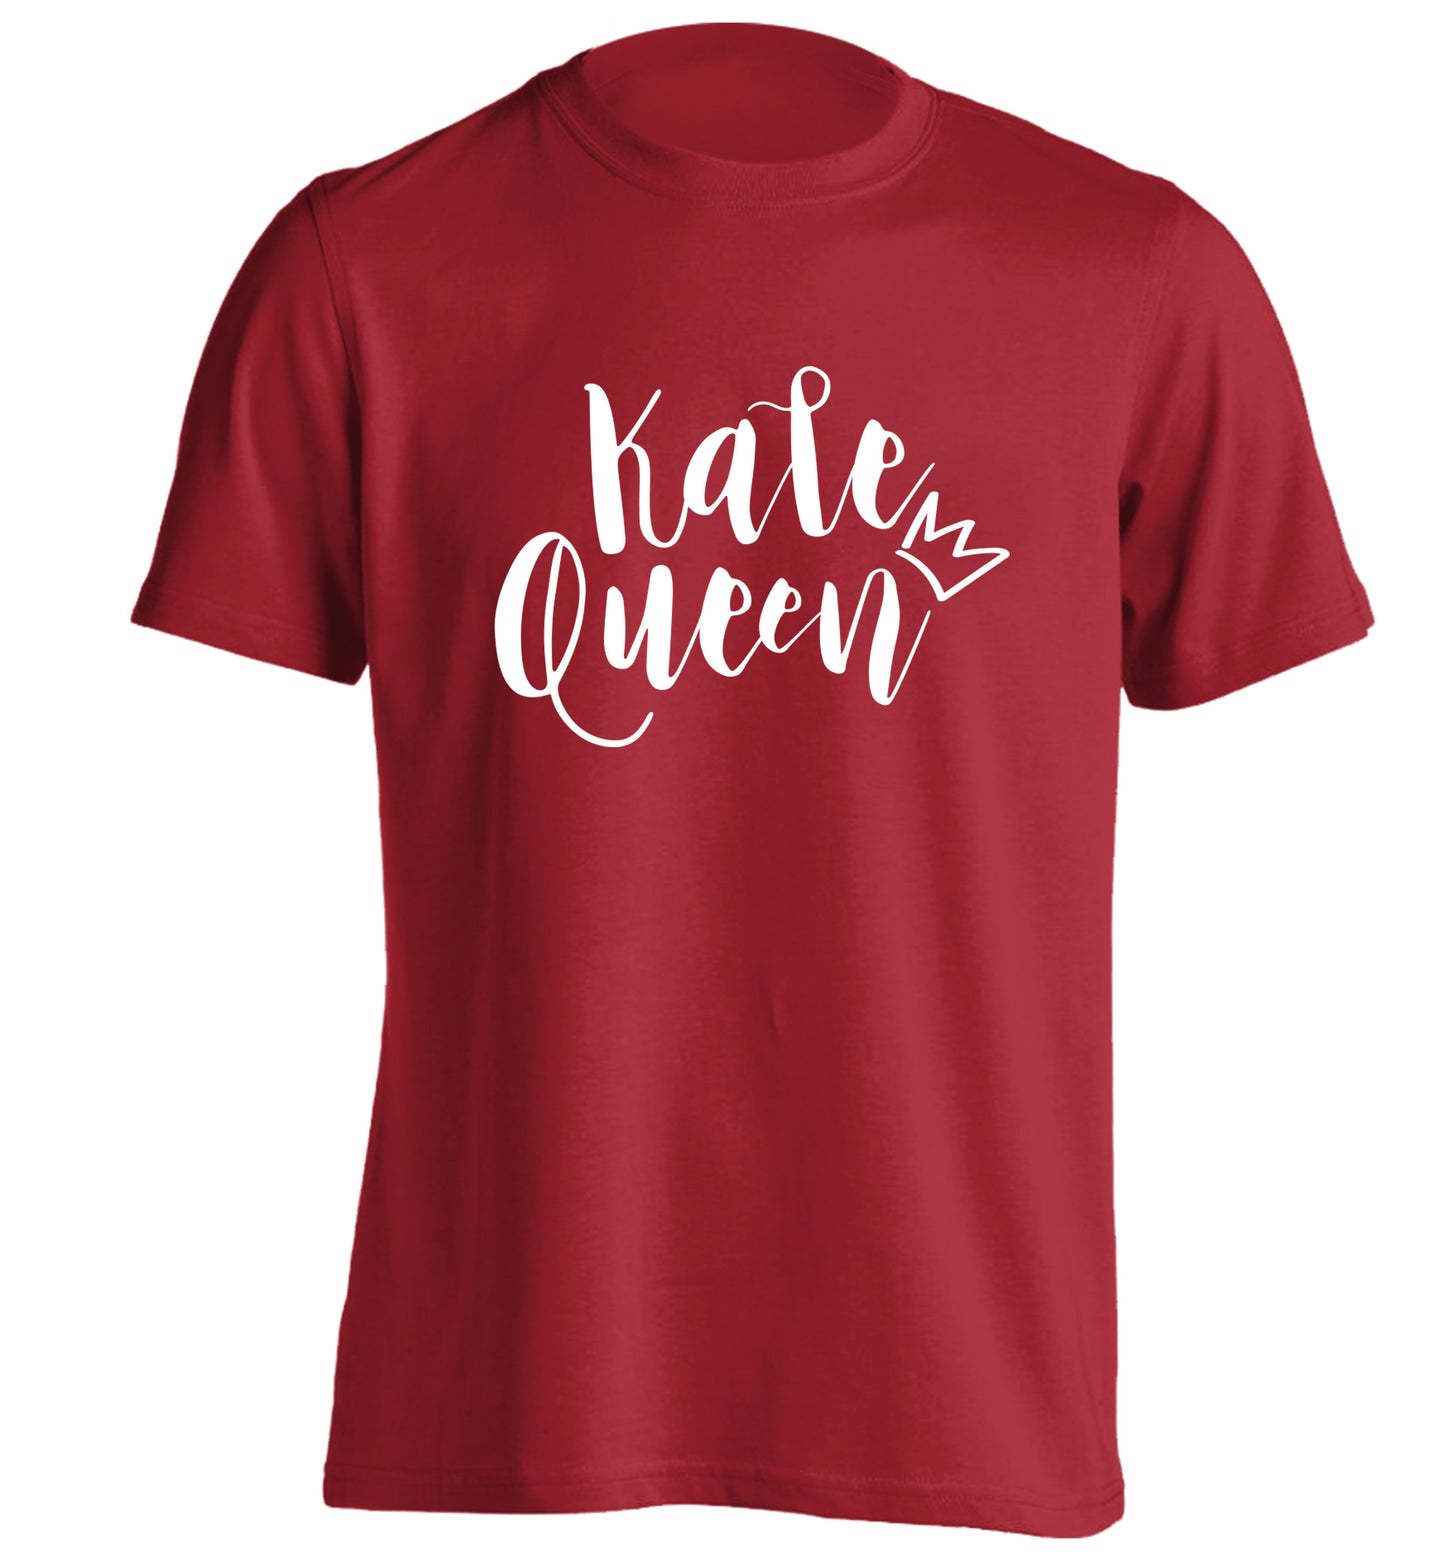 Kale Queen adults unisex red Tshirt 2XL